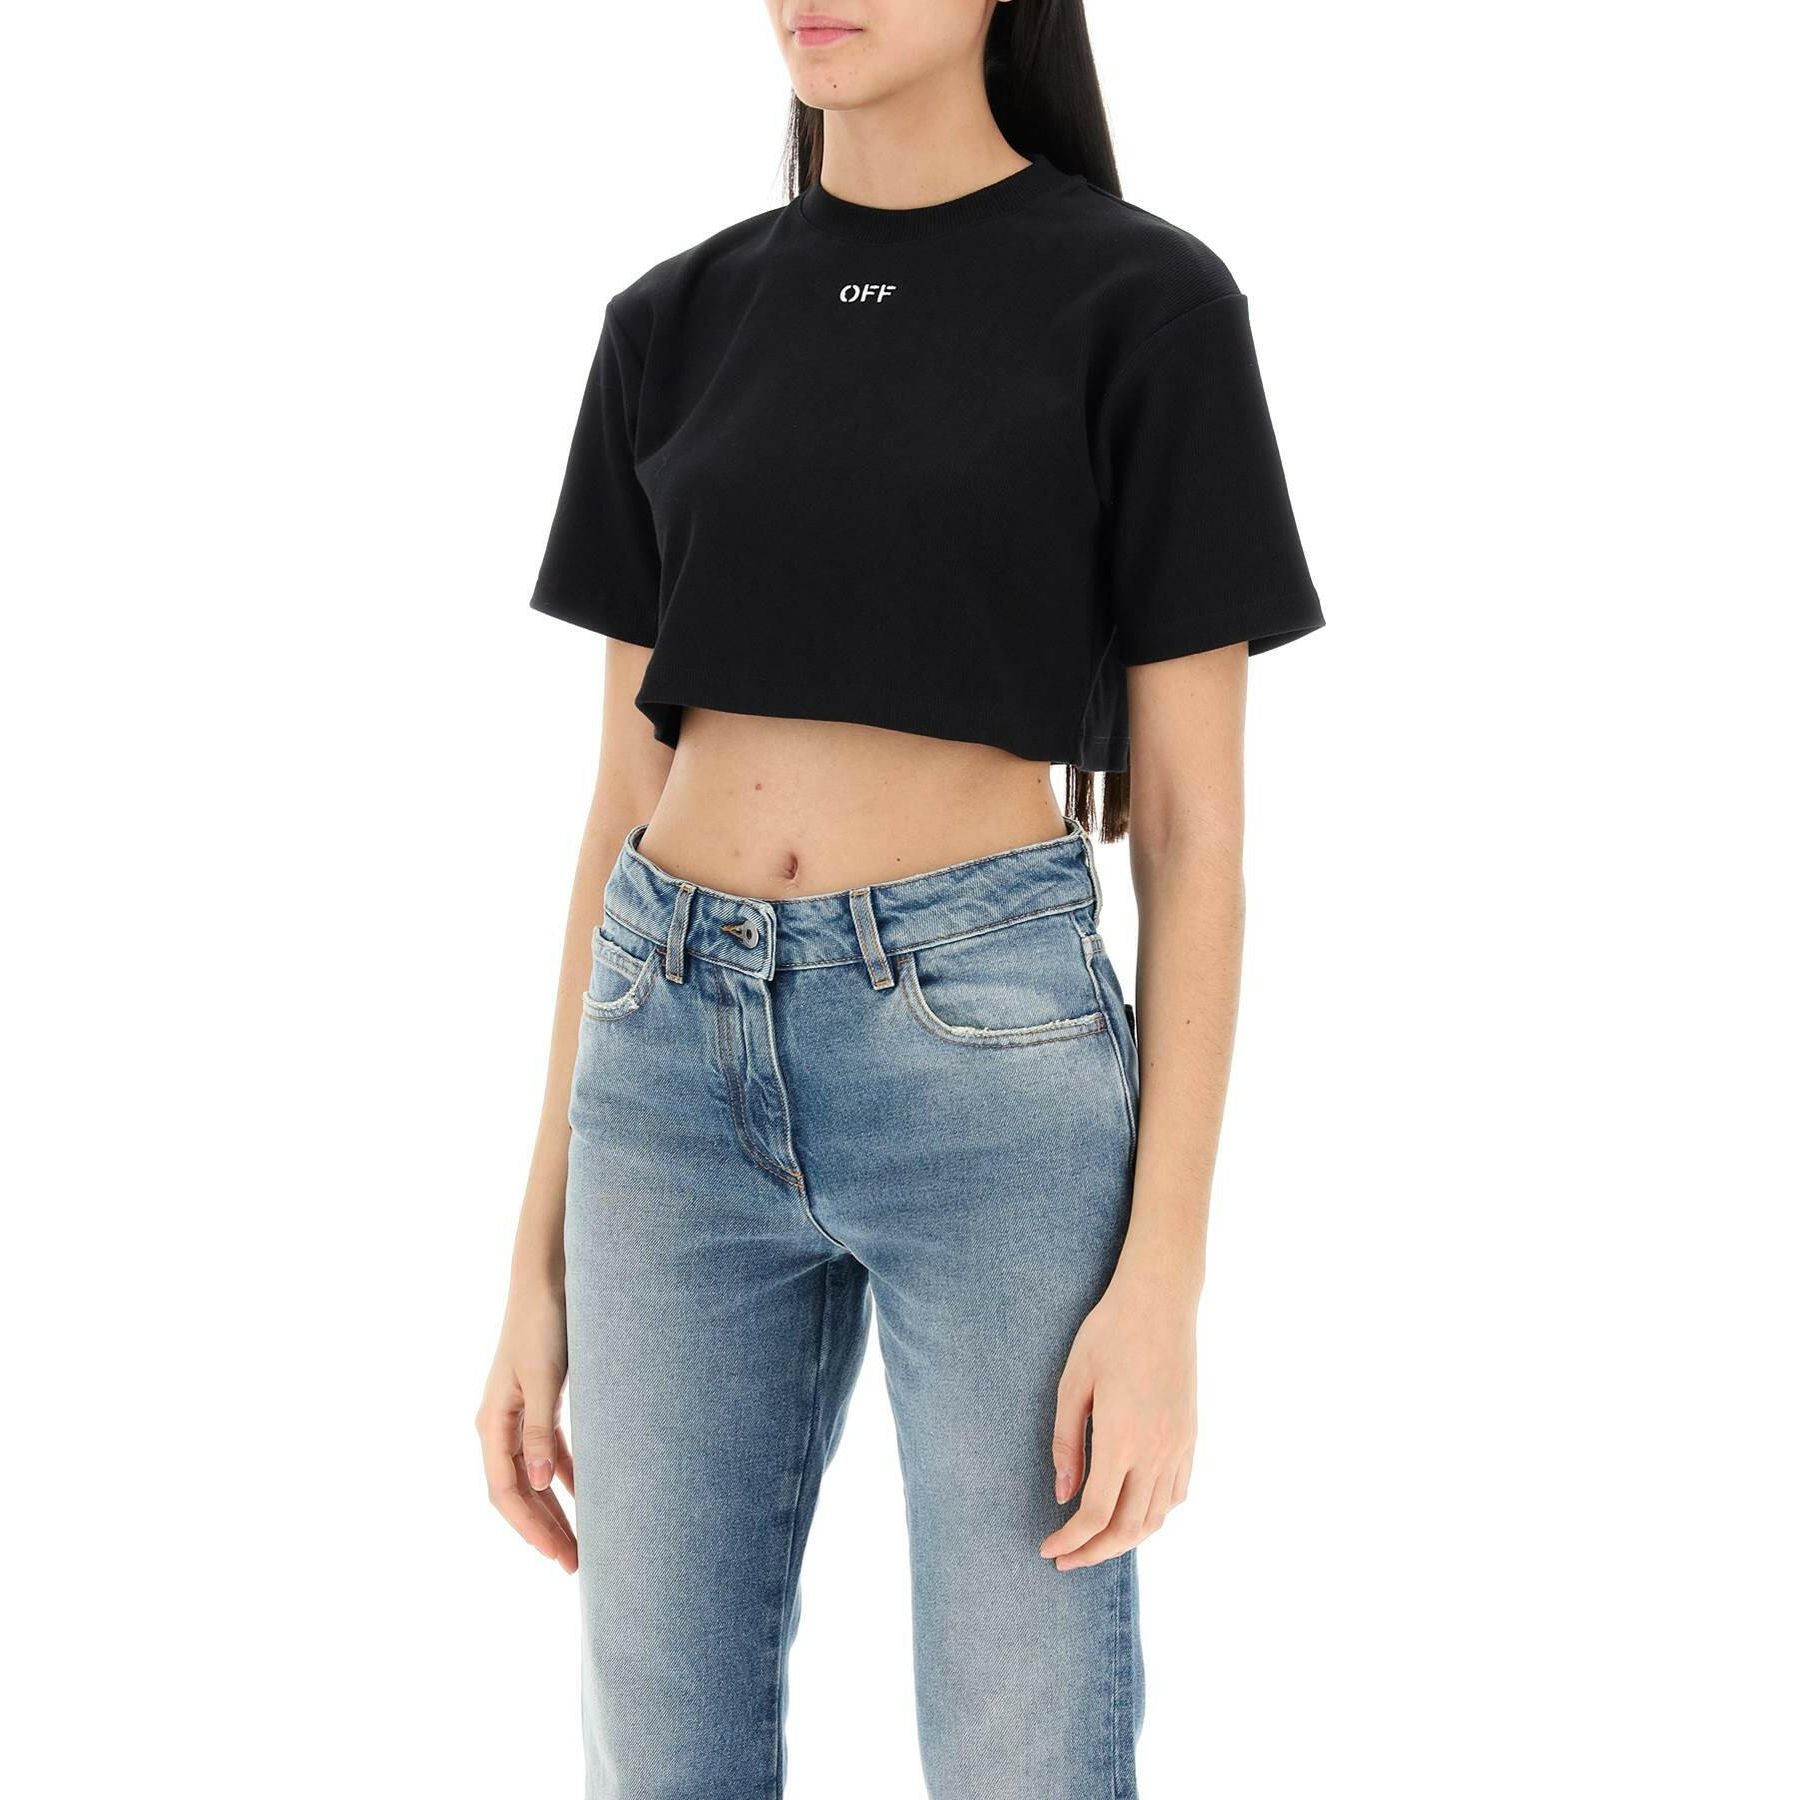 Off Embroidered Cotton Cropped T-shirt OFF-WHITE JOHN JULIA.